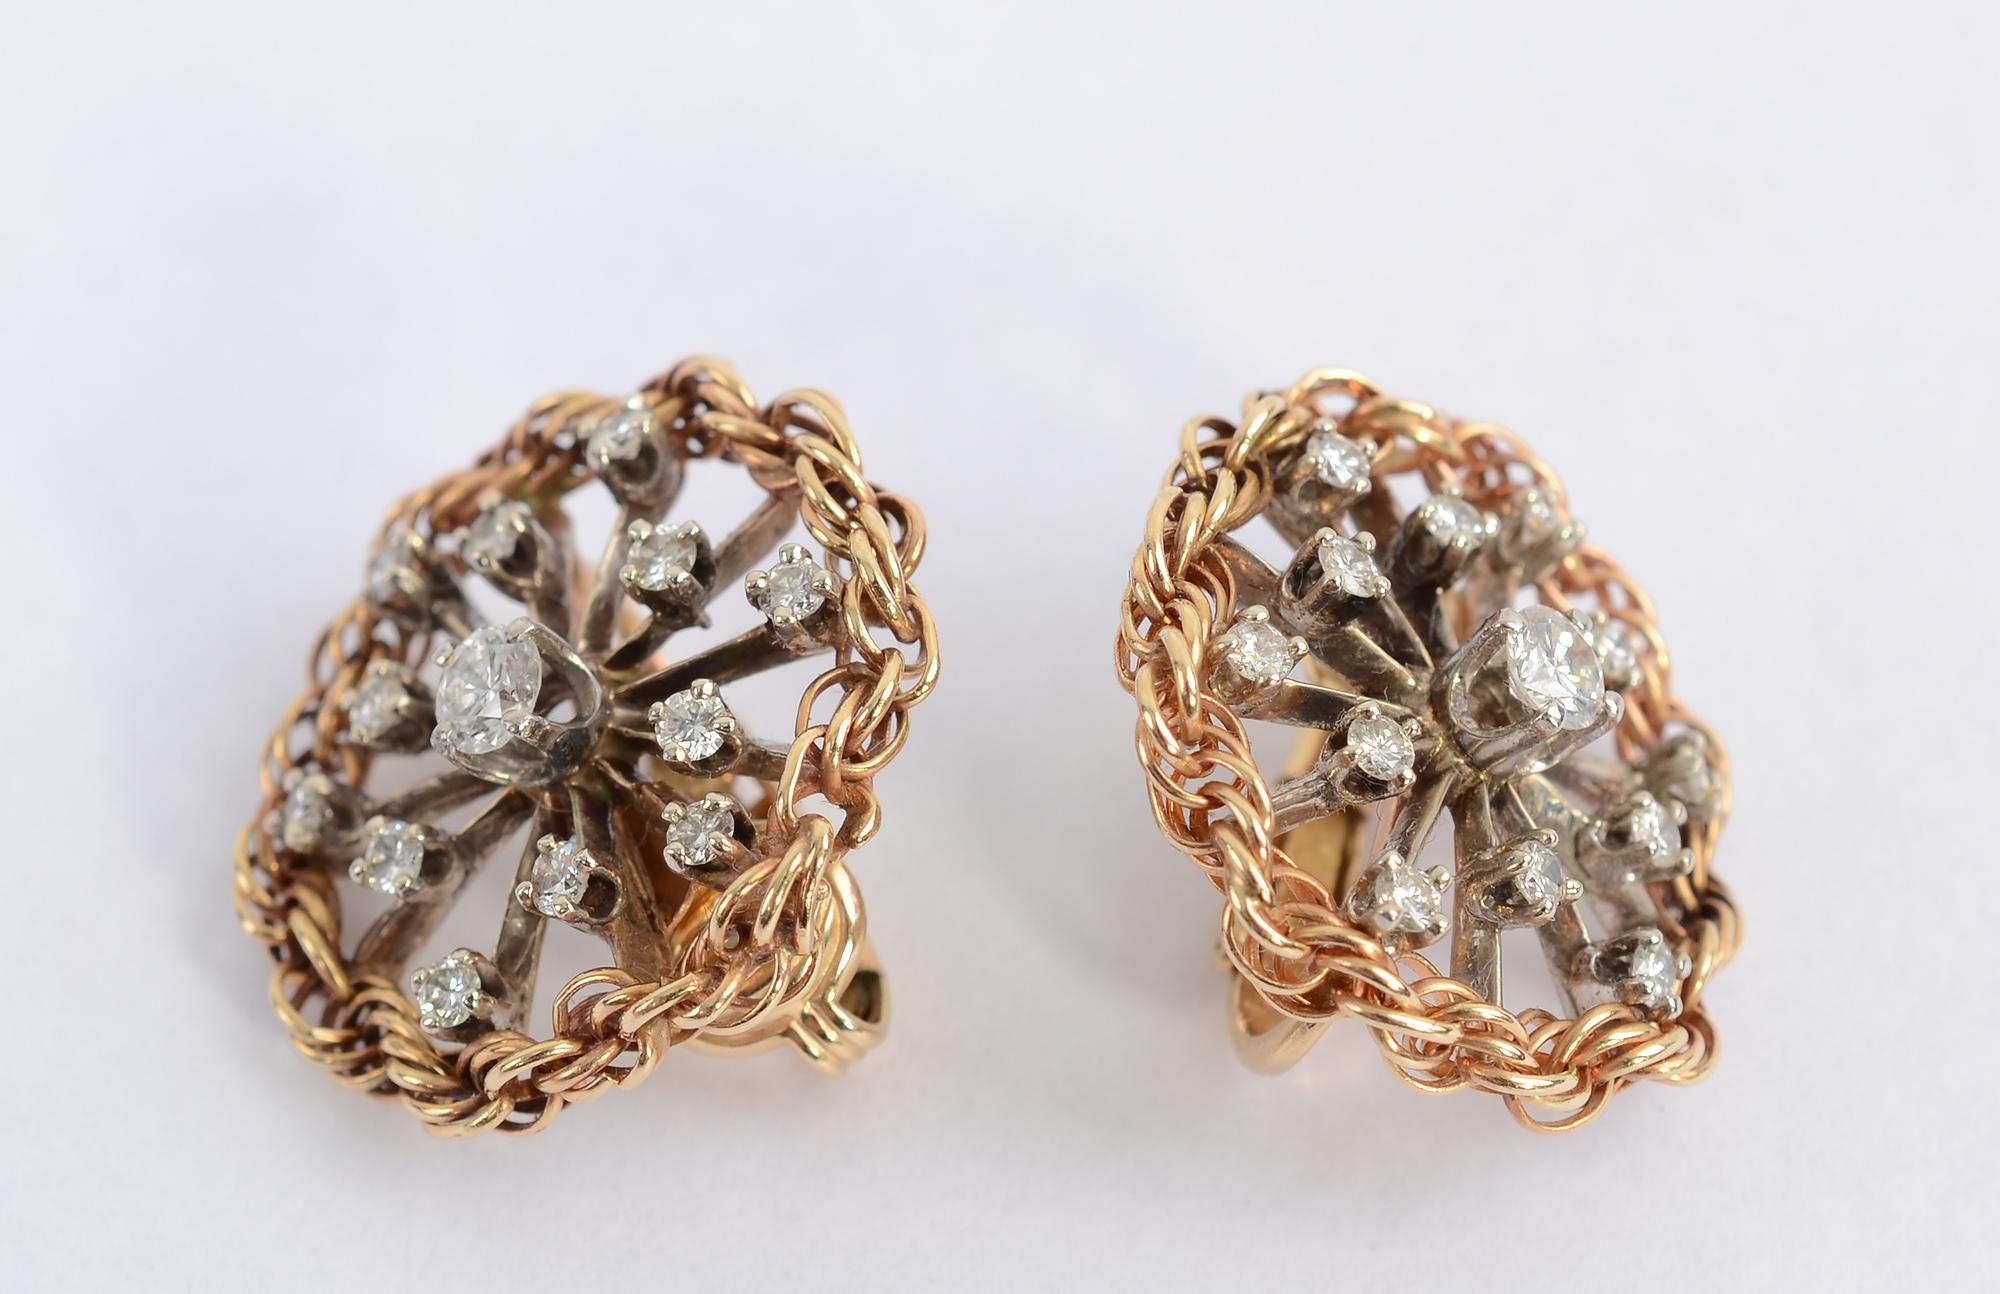 Eleven satellite diamonds surround a fifth of a carat diamond in these quintessentially 1950's earrings. The diamonds and spokes are white gold while the twisted roping around the stones is yellow gold. The earrings have clip backs. They measure 7/8